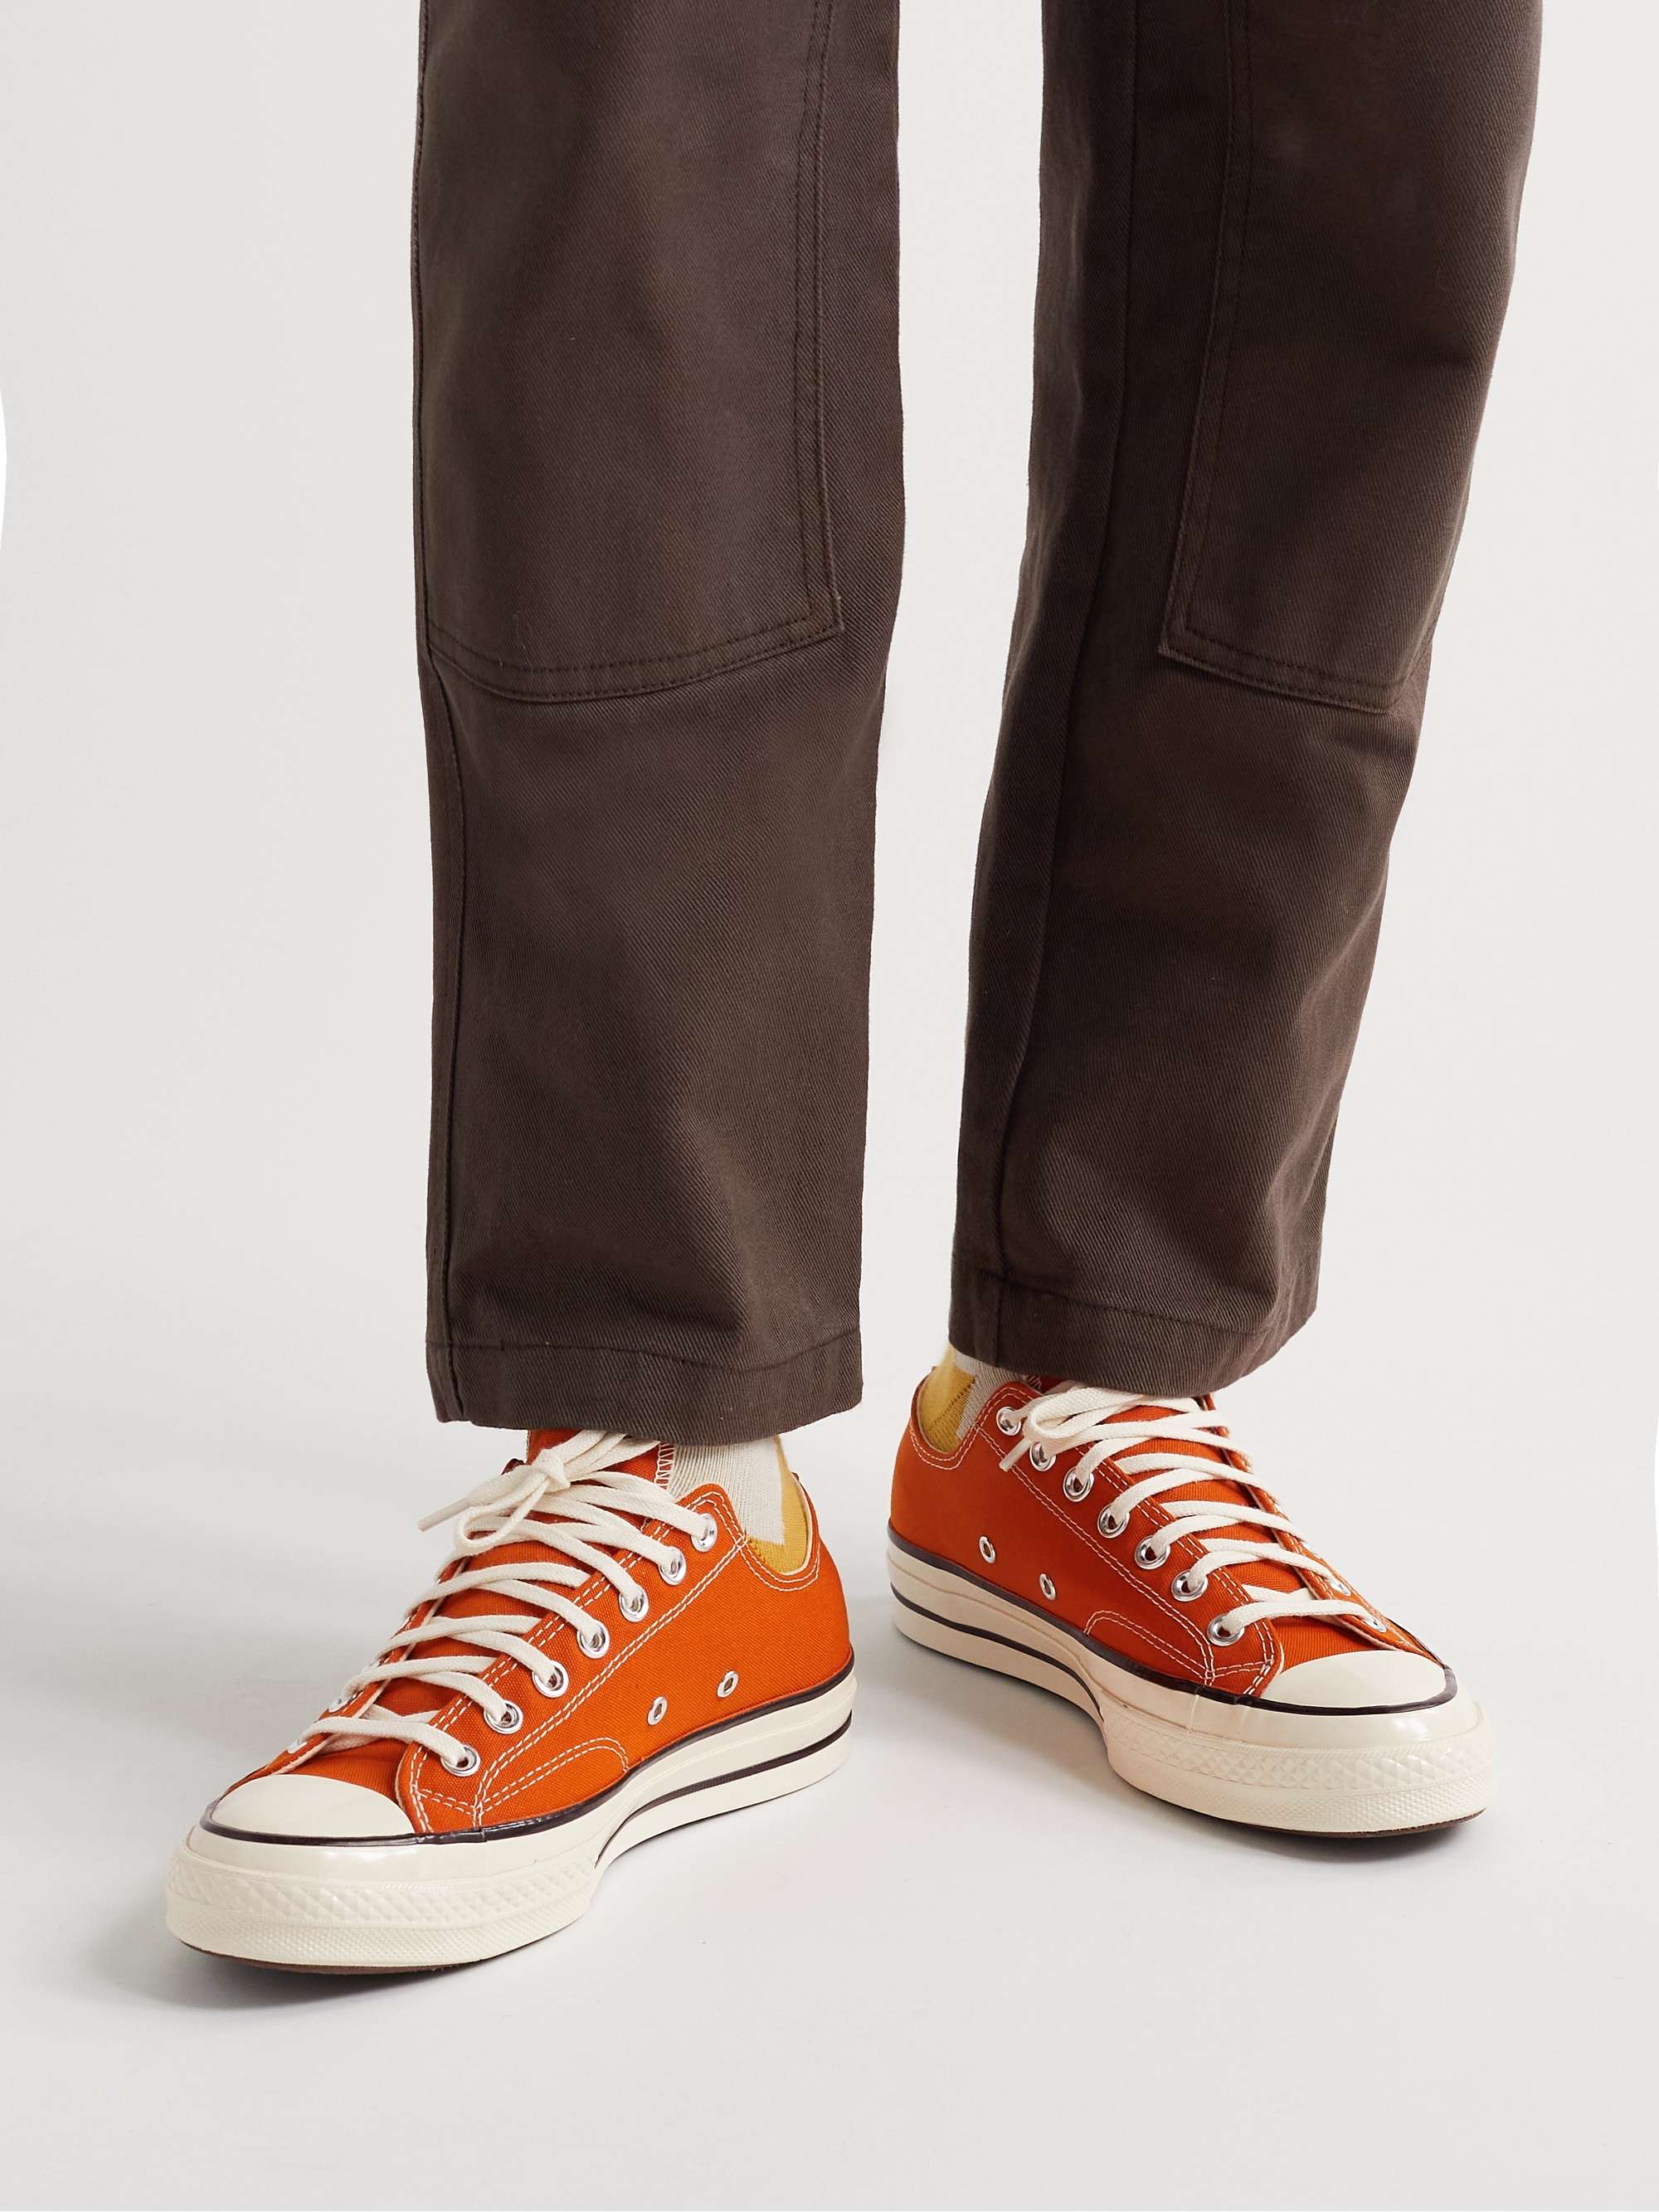 CONVERSE Chuck 70 OX Recycled Canvas Sneakers